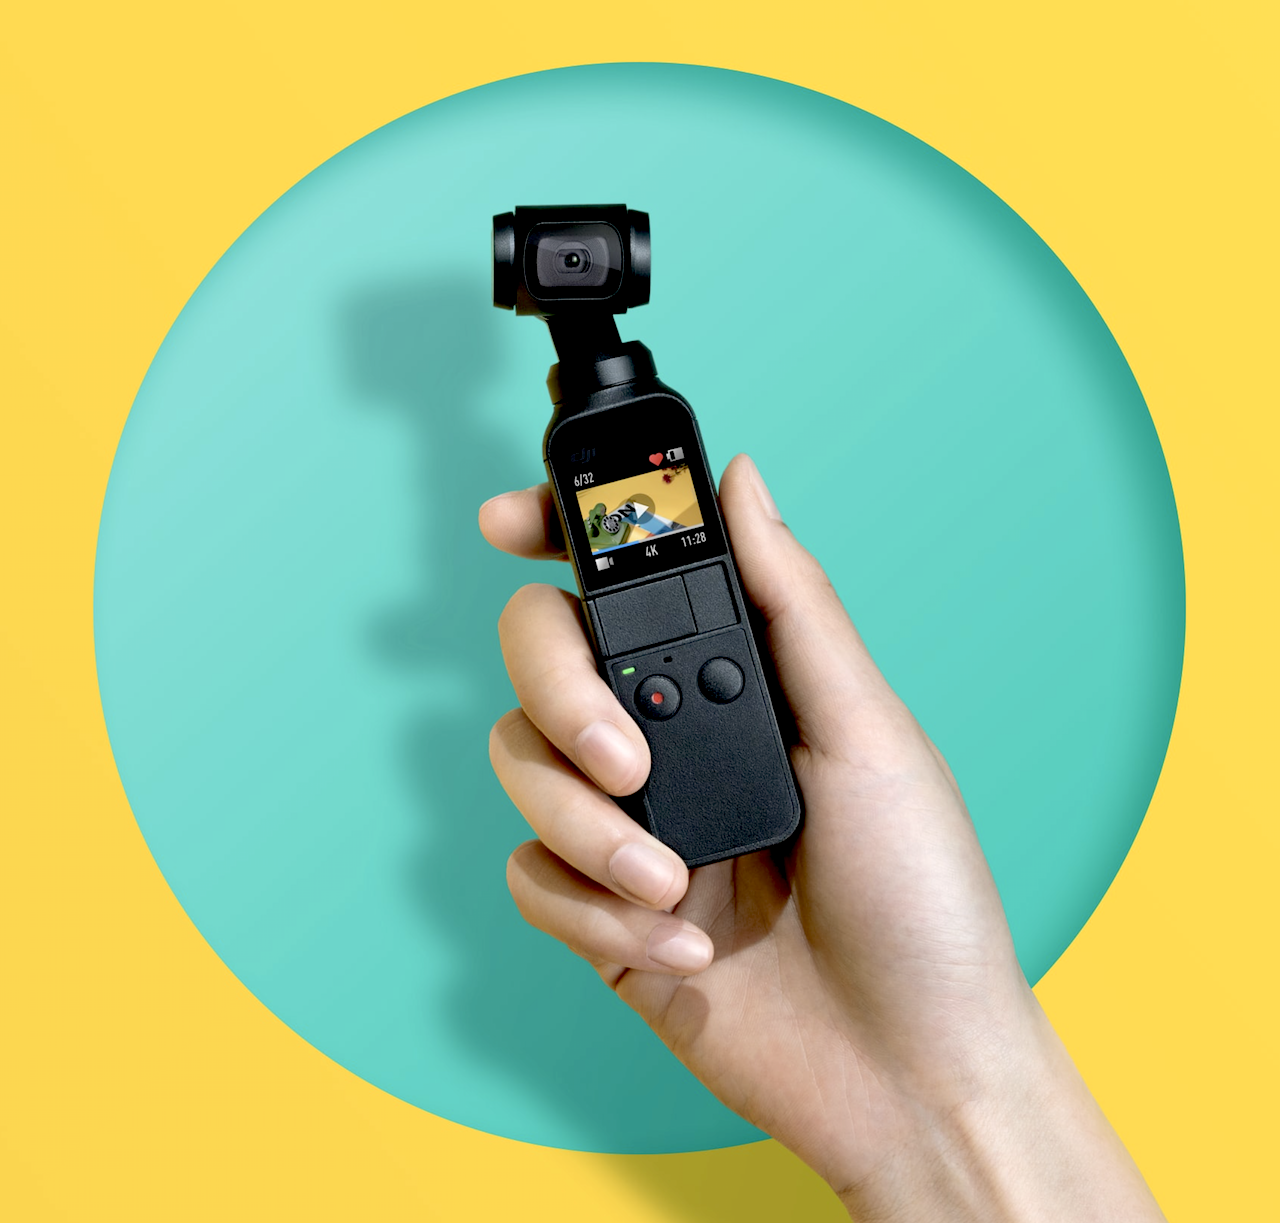 THE NEW DJI OSMO POCKET MIGHT BE THE DEVICE YOU WERE WAITING FOR TO